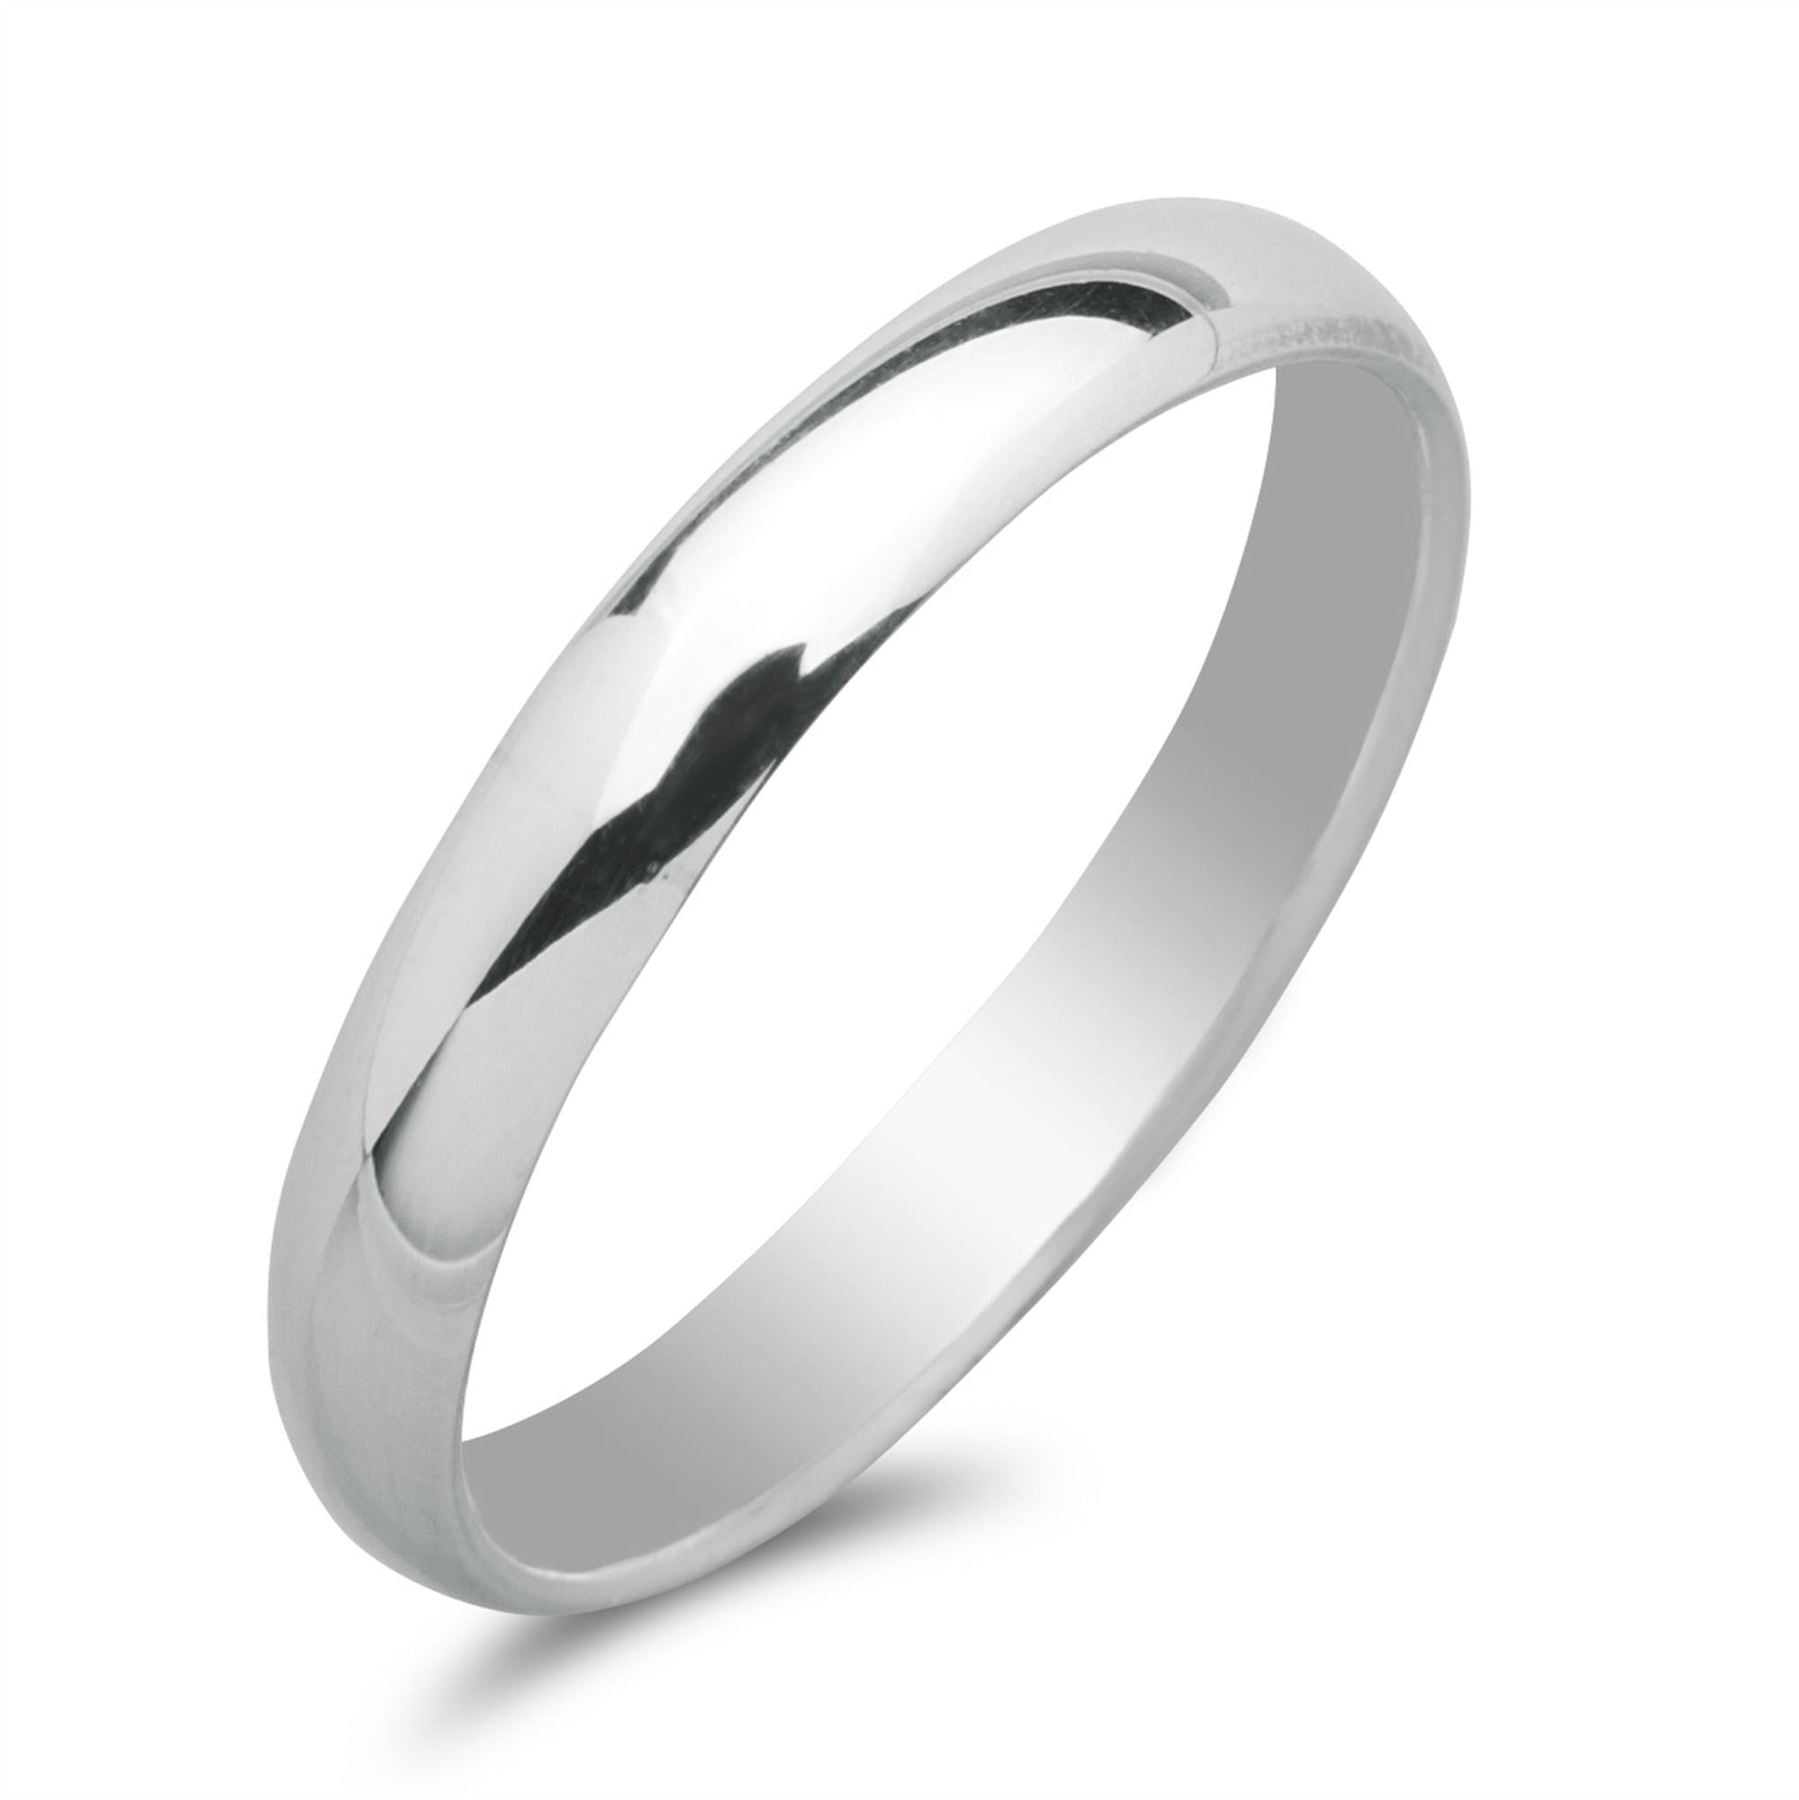 Buy 8mm Brushed Matte Black Titanium Stainless Steel Classical Simple Plain  Ring Wedding Band, Metal, Cubic Zirconia at Amazon.in